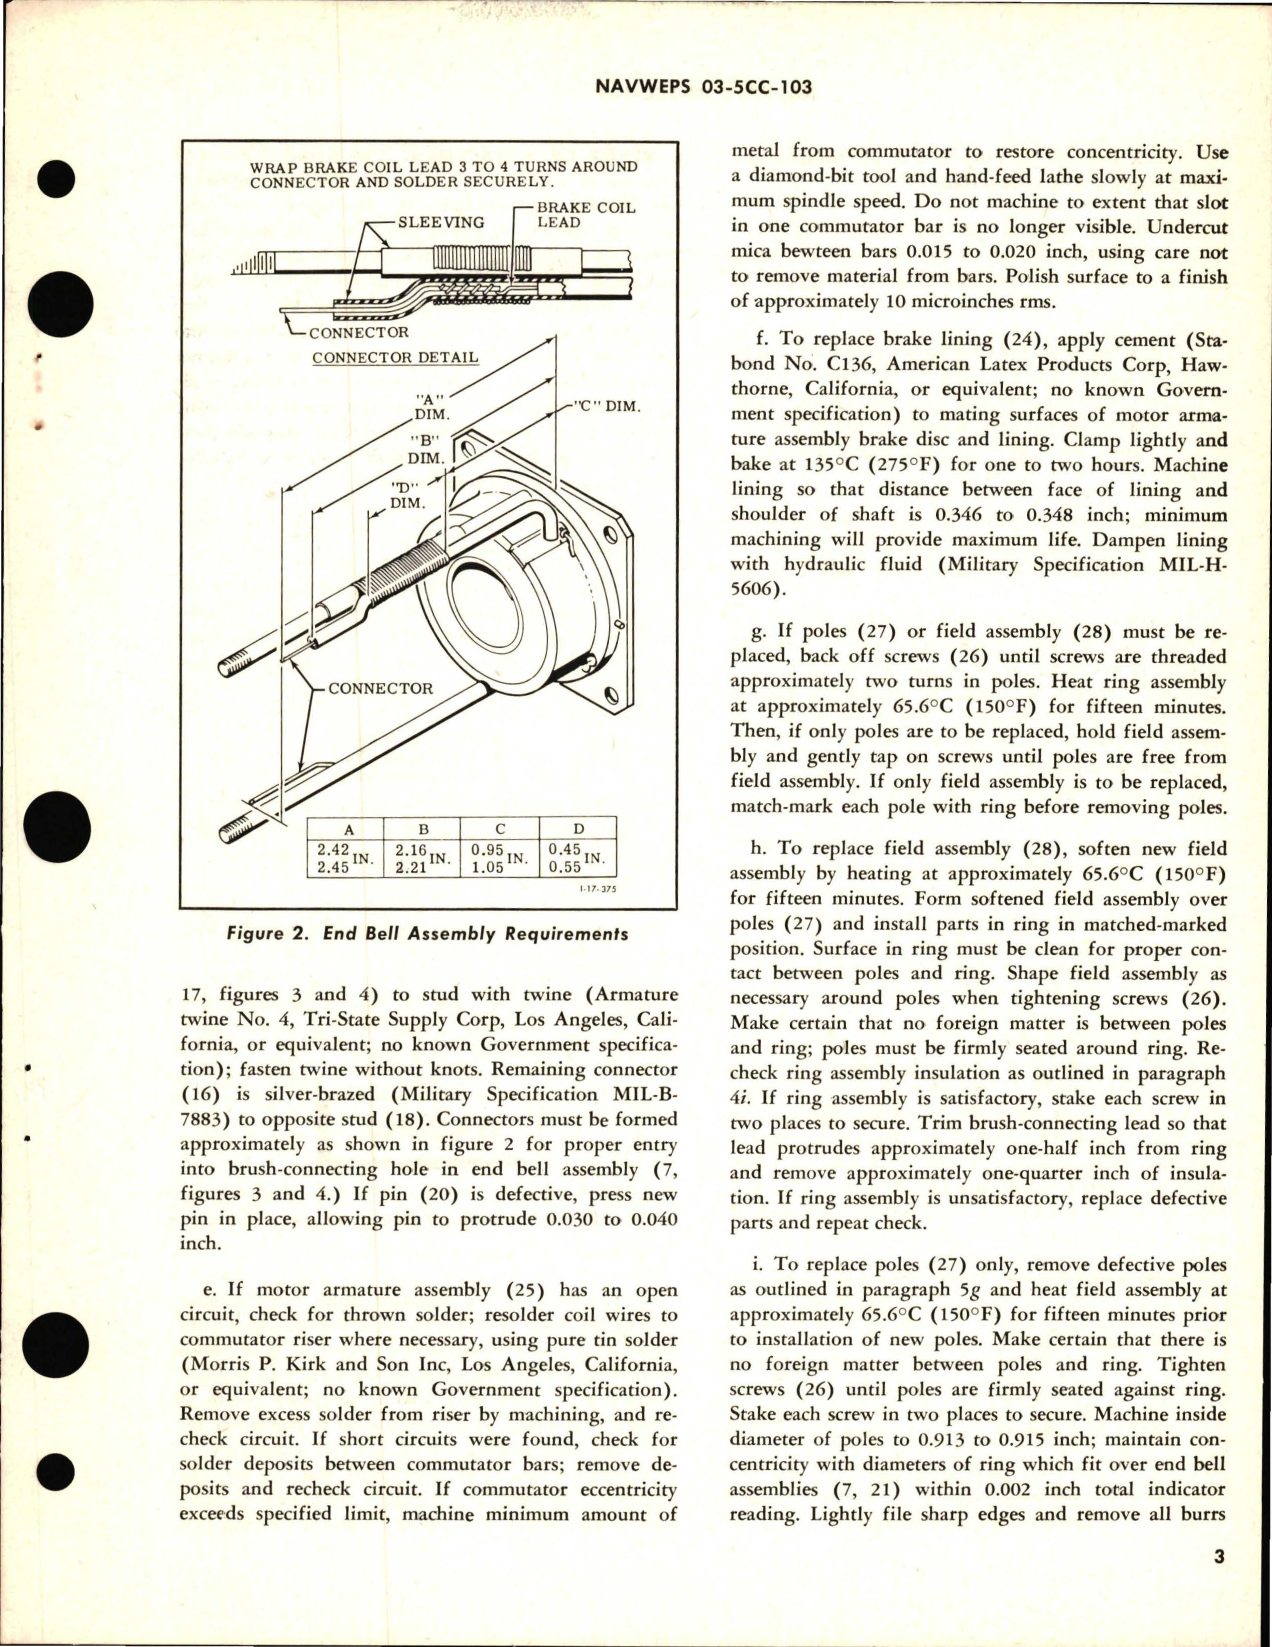 Sample page 5 from AirCorps Library document: Overhaul Instructions with Parts Breakdown for Aircraft Direct Current Motors - Part 36702 and 36702-2 